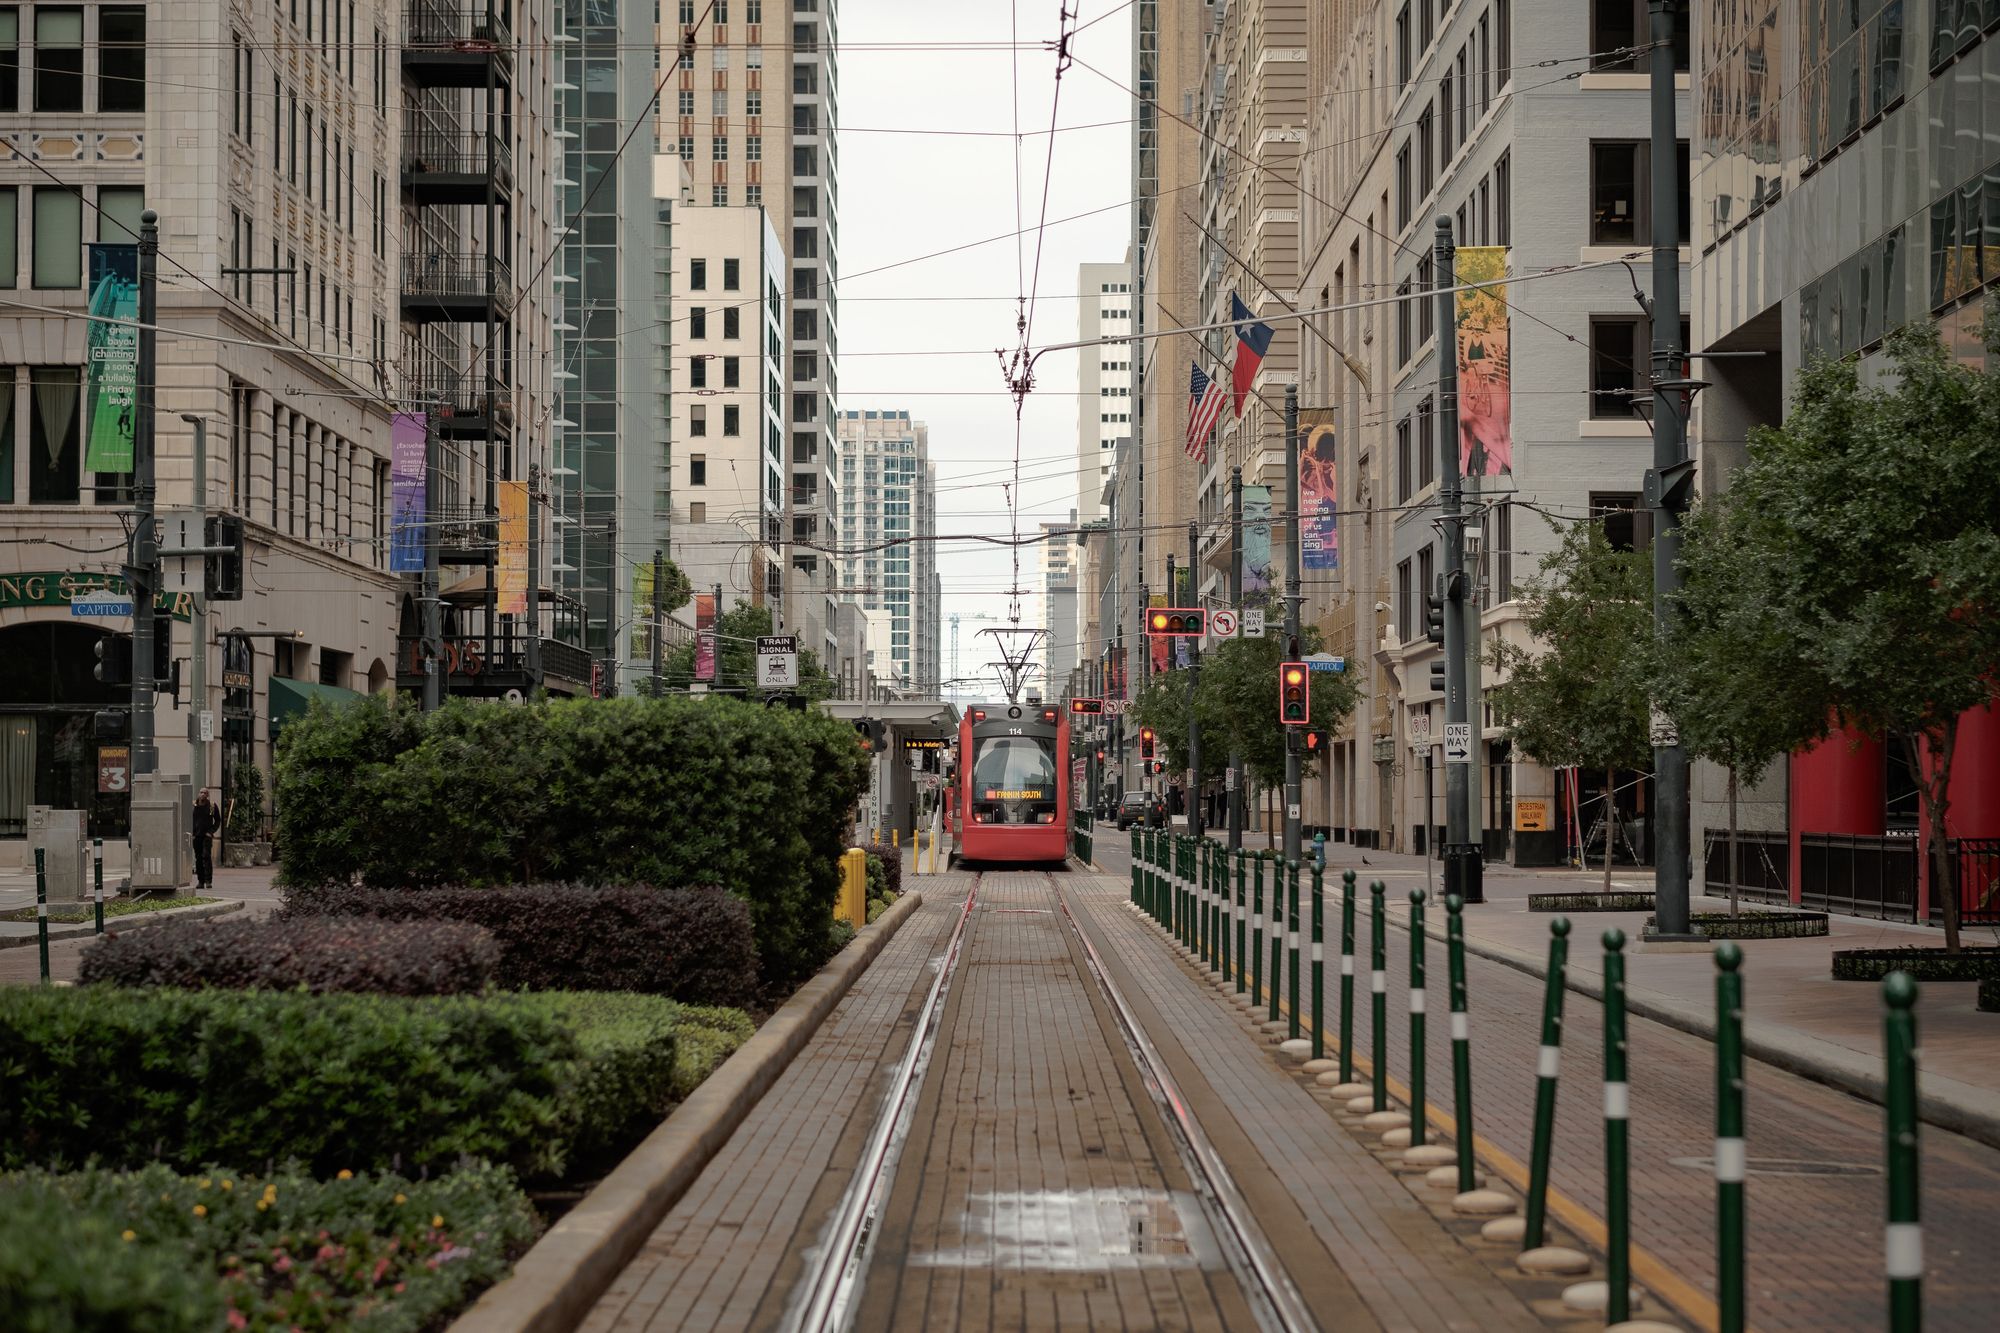 A Streetcar in Downtown Houston